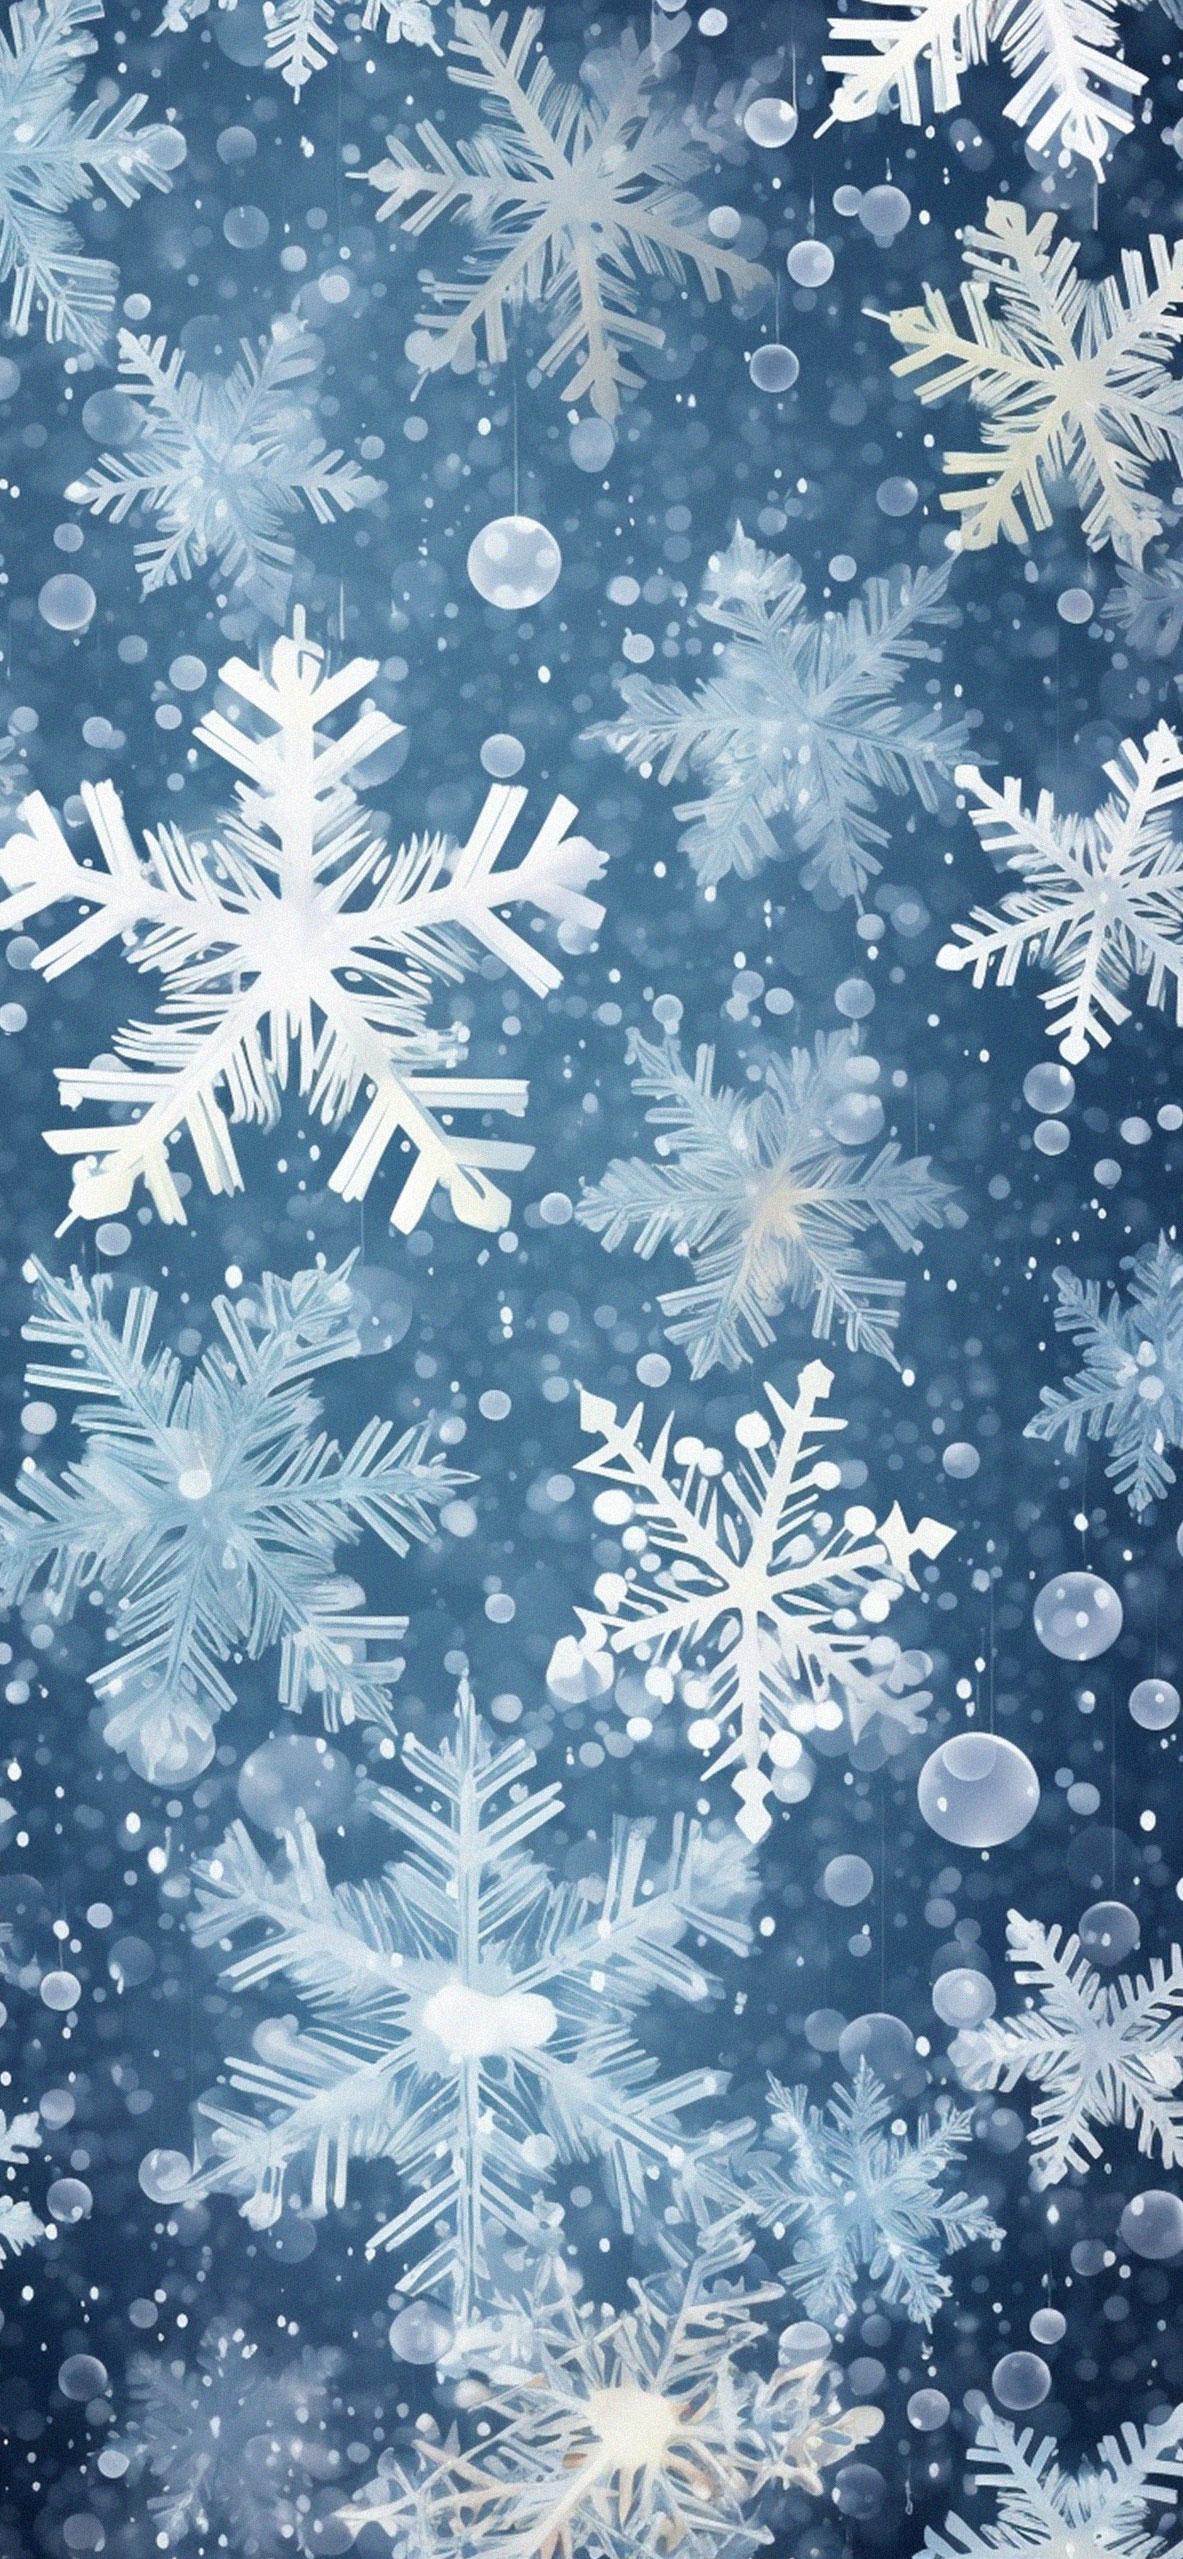 Snowflakes Fall Blue Wallpaper Winter For iPhone 4k